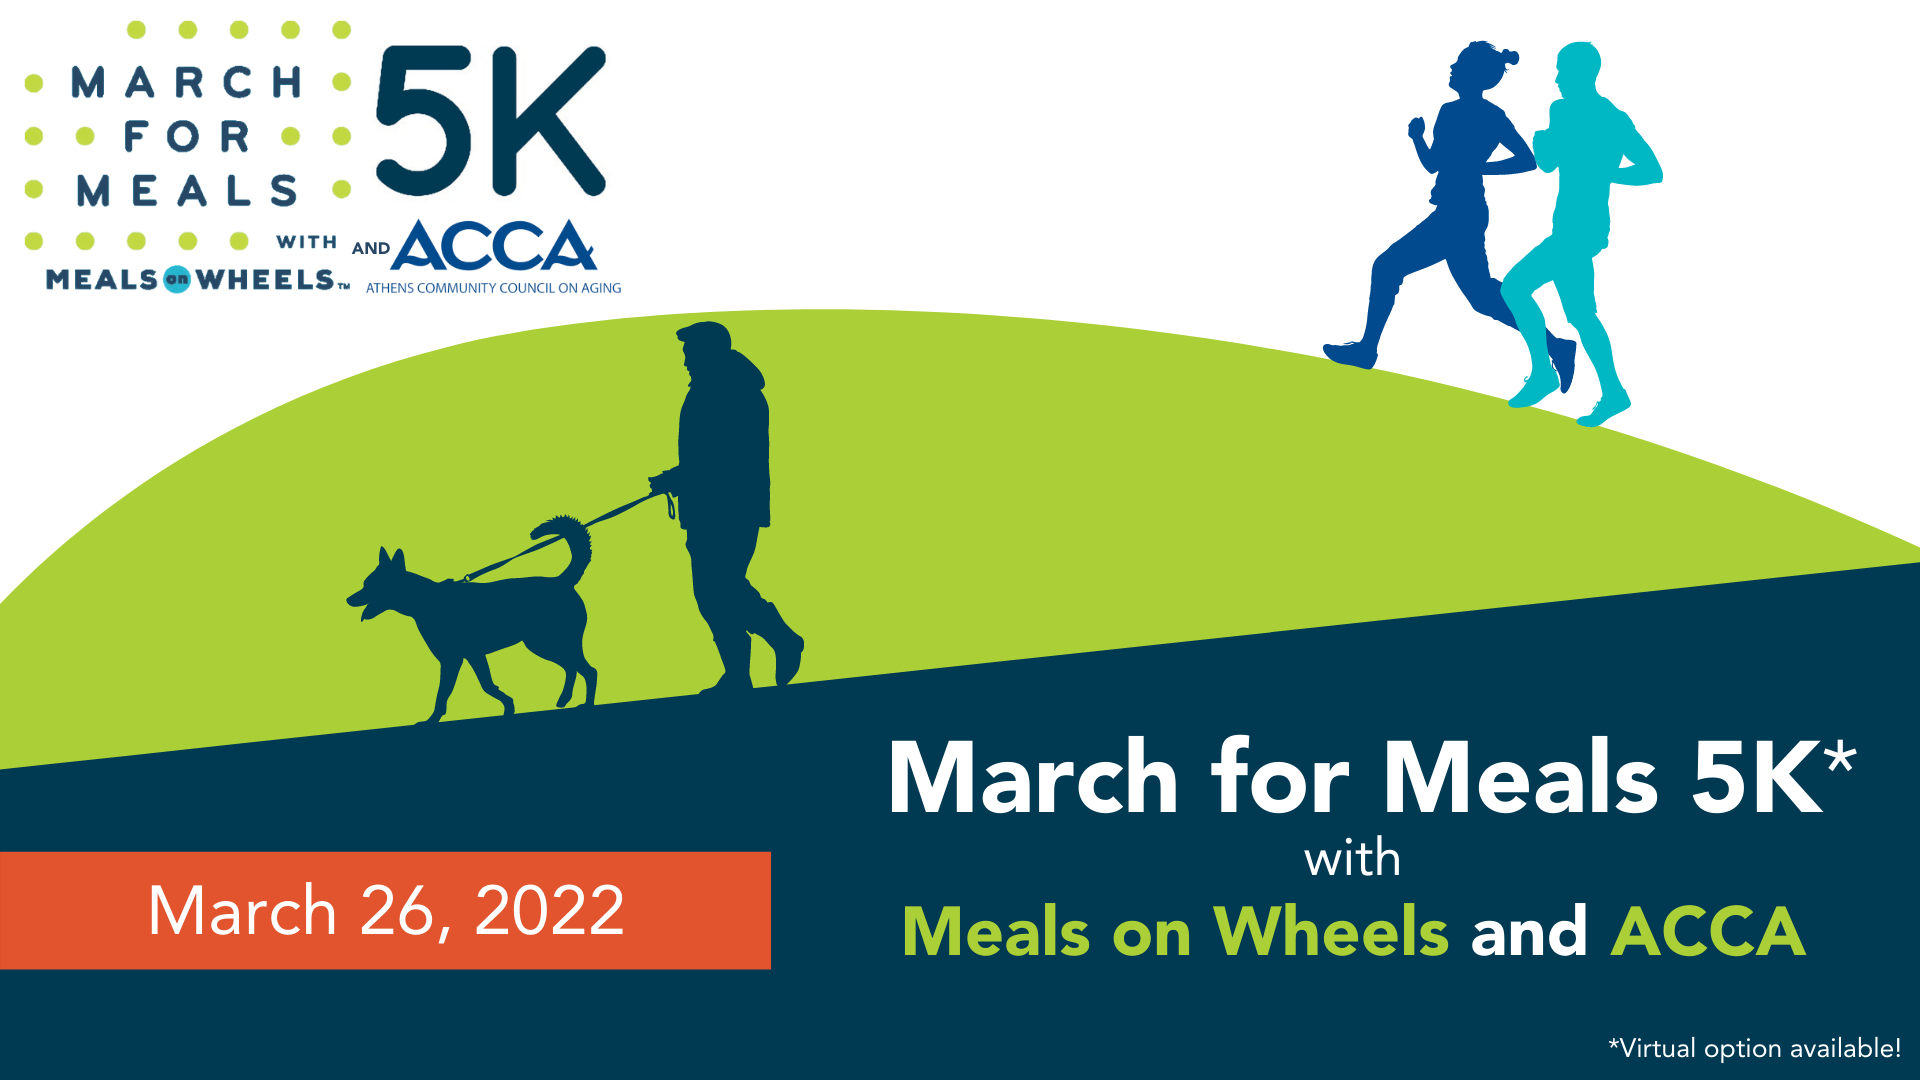 Graphic advertising the 2022 March for Meals 5K hosted by Meals on Wheels and ACCA